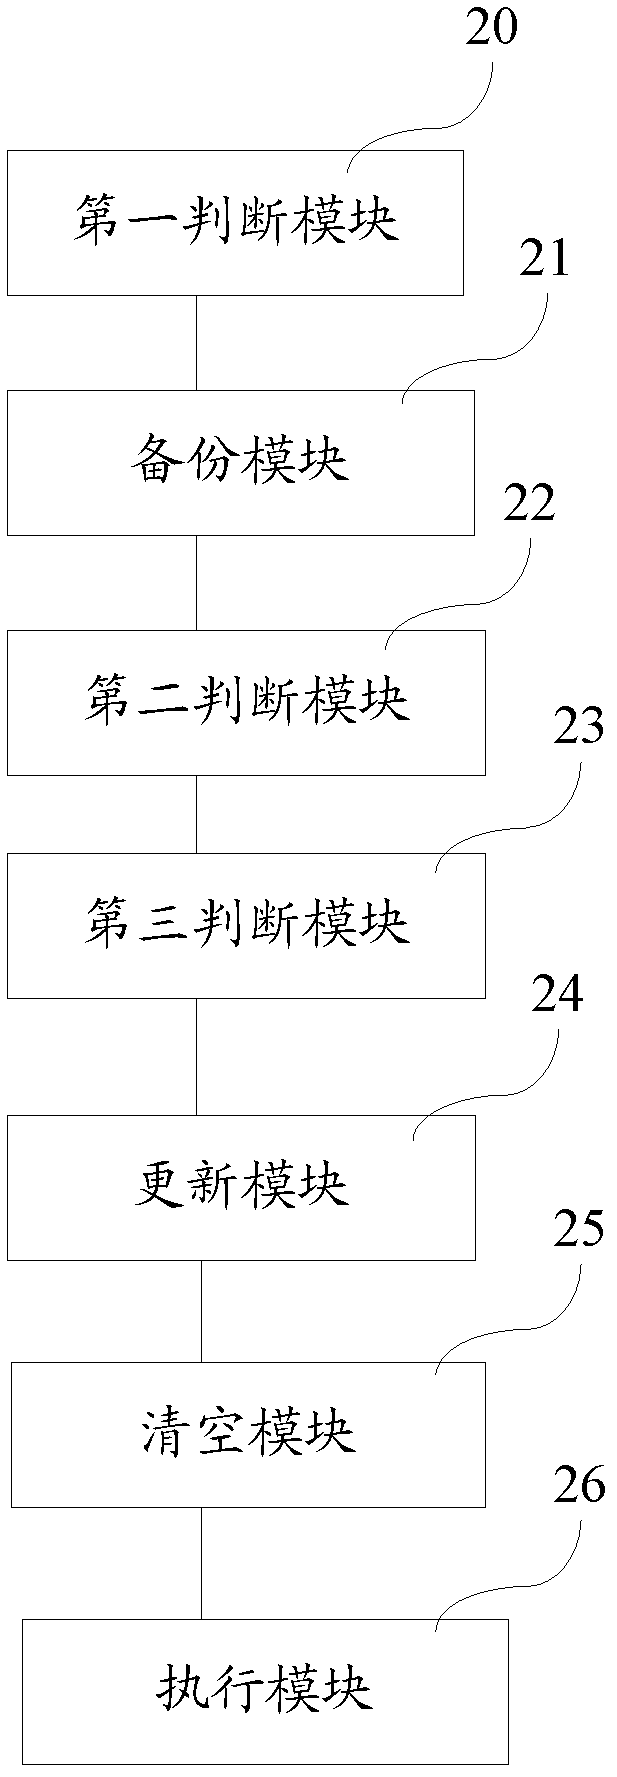 Intelligent card and data processing method and device therefor